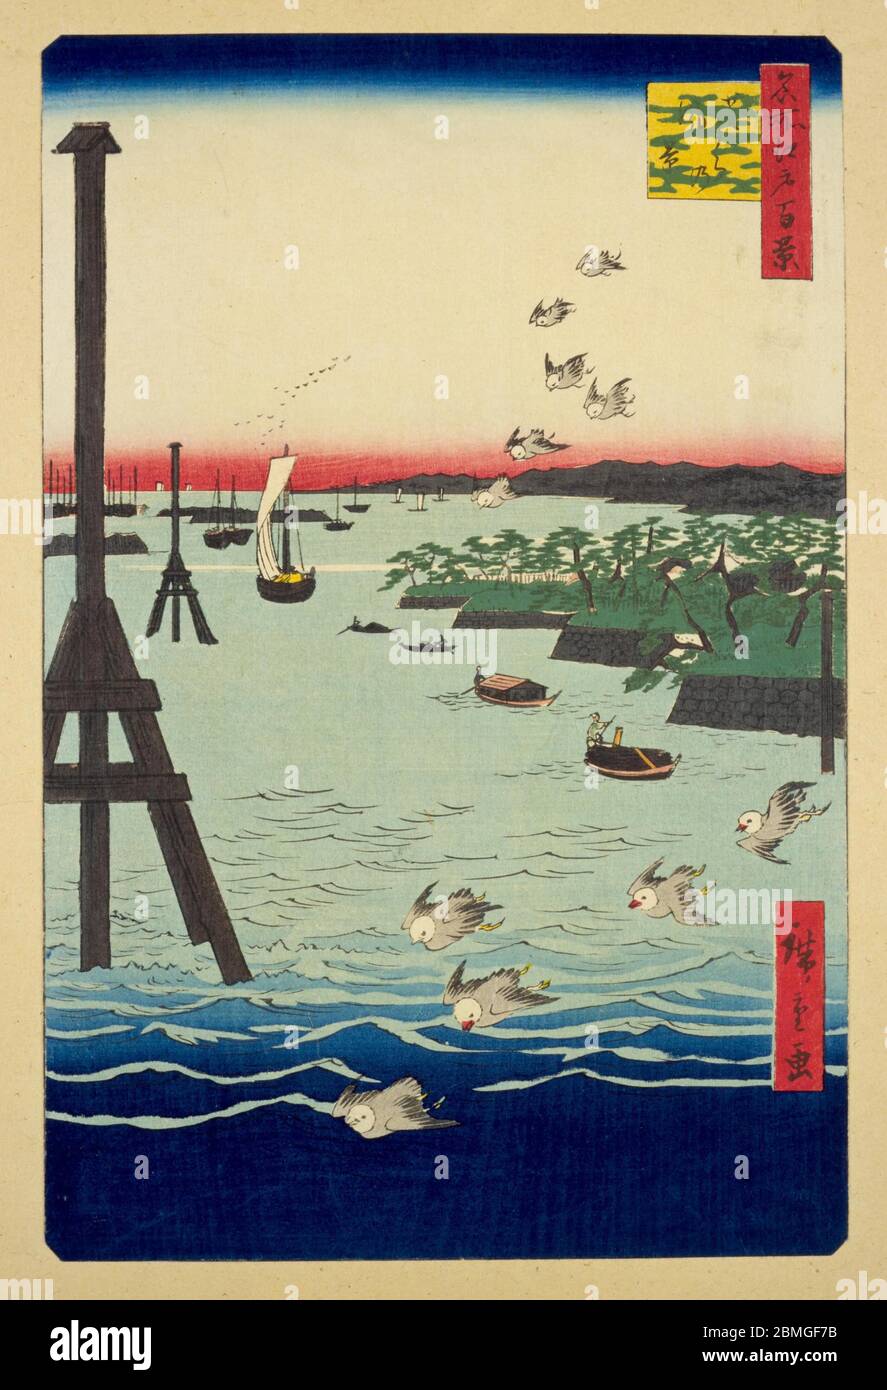 [ 1850s Japan - Edo Bay ] —   Birds fly over A-frame channel markers and boats plying the waters of Edo Bay at Shibaura in Edo (current Tokyo), 1856 (Ansei 3). On the right, Hamarikyu Gardens can be seen.  This woodblock print is image 108 in One Hundred Famous Views of Edo (名所江戸百景, Meisho Edo Hyakkei), a series created by ukiyoe artist Utagawa Hiroshige (歌川広重, 1797–1858).  It is one of 20 winter scenes in the series.  Title: View of Shiba Coast (芝うらの風景, Shibaura no fukei)  19th century vintage Ukiyoe woodblock print. Stock Photo